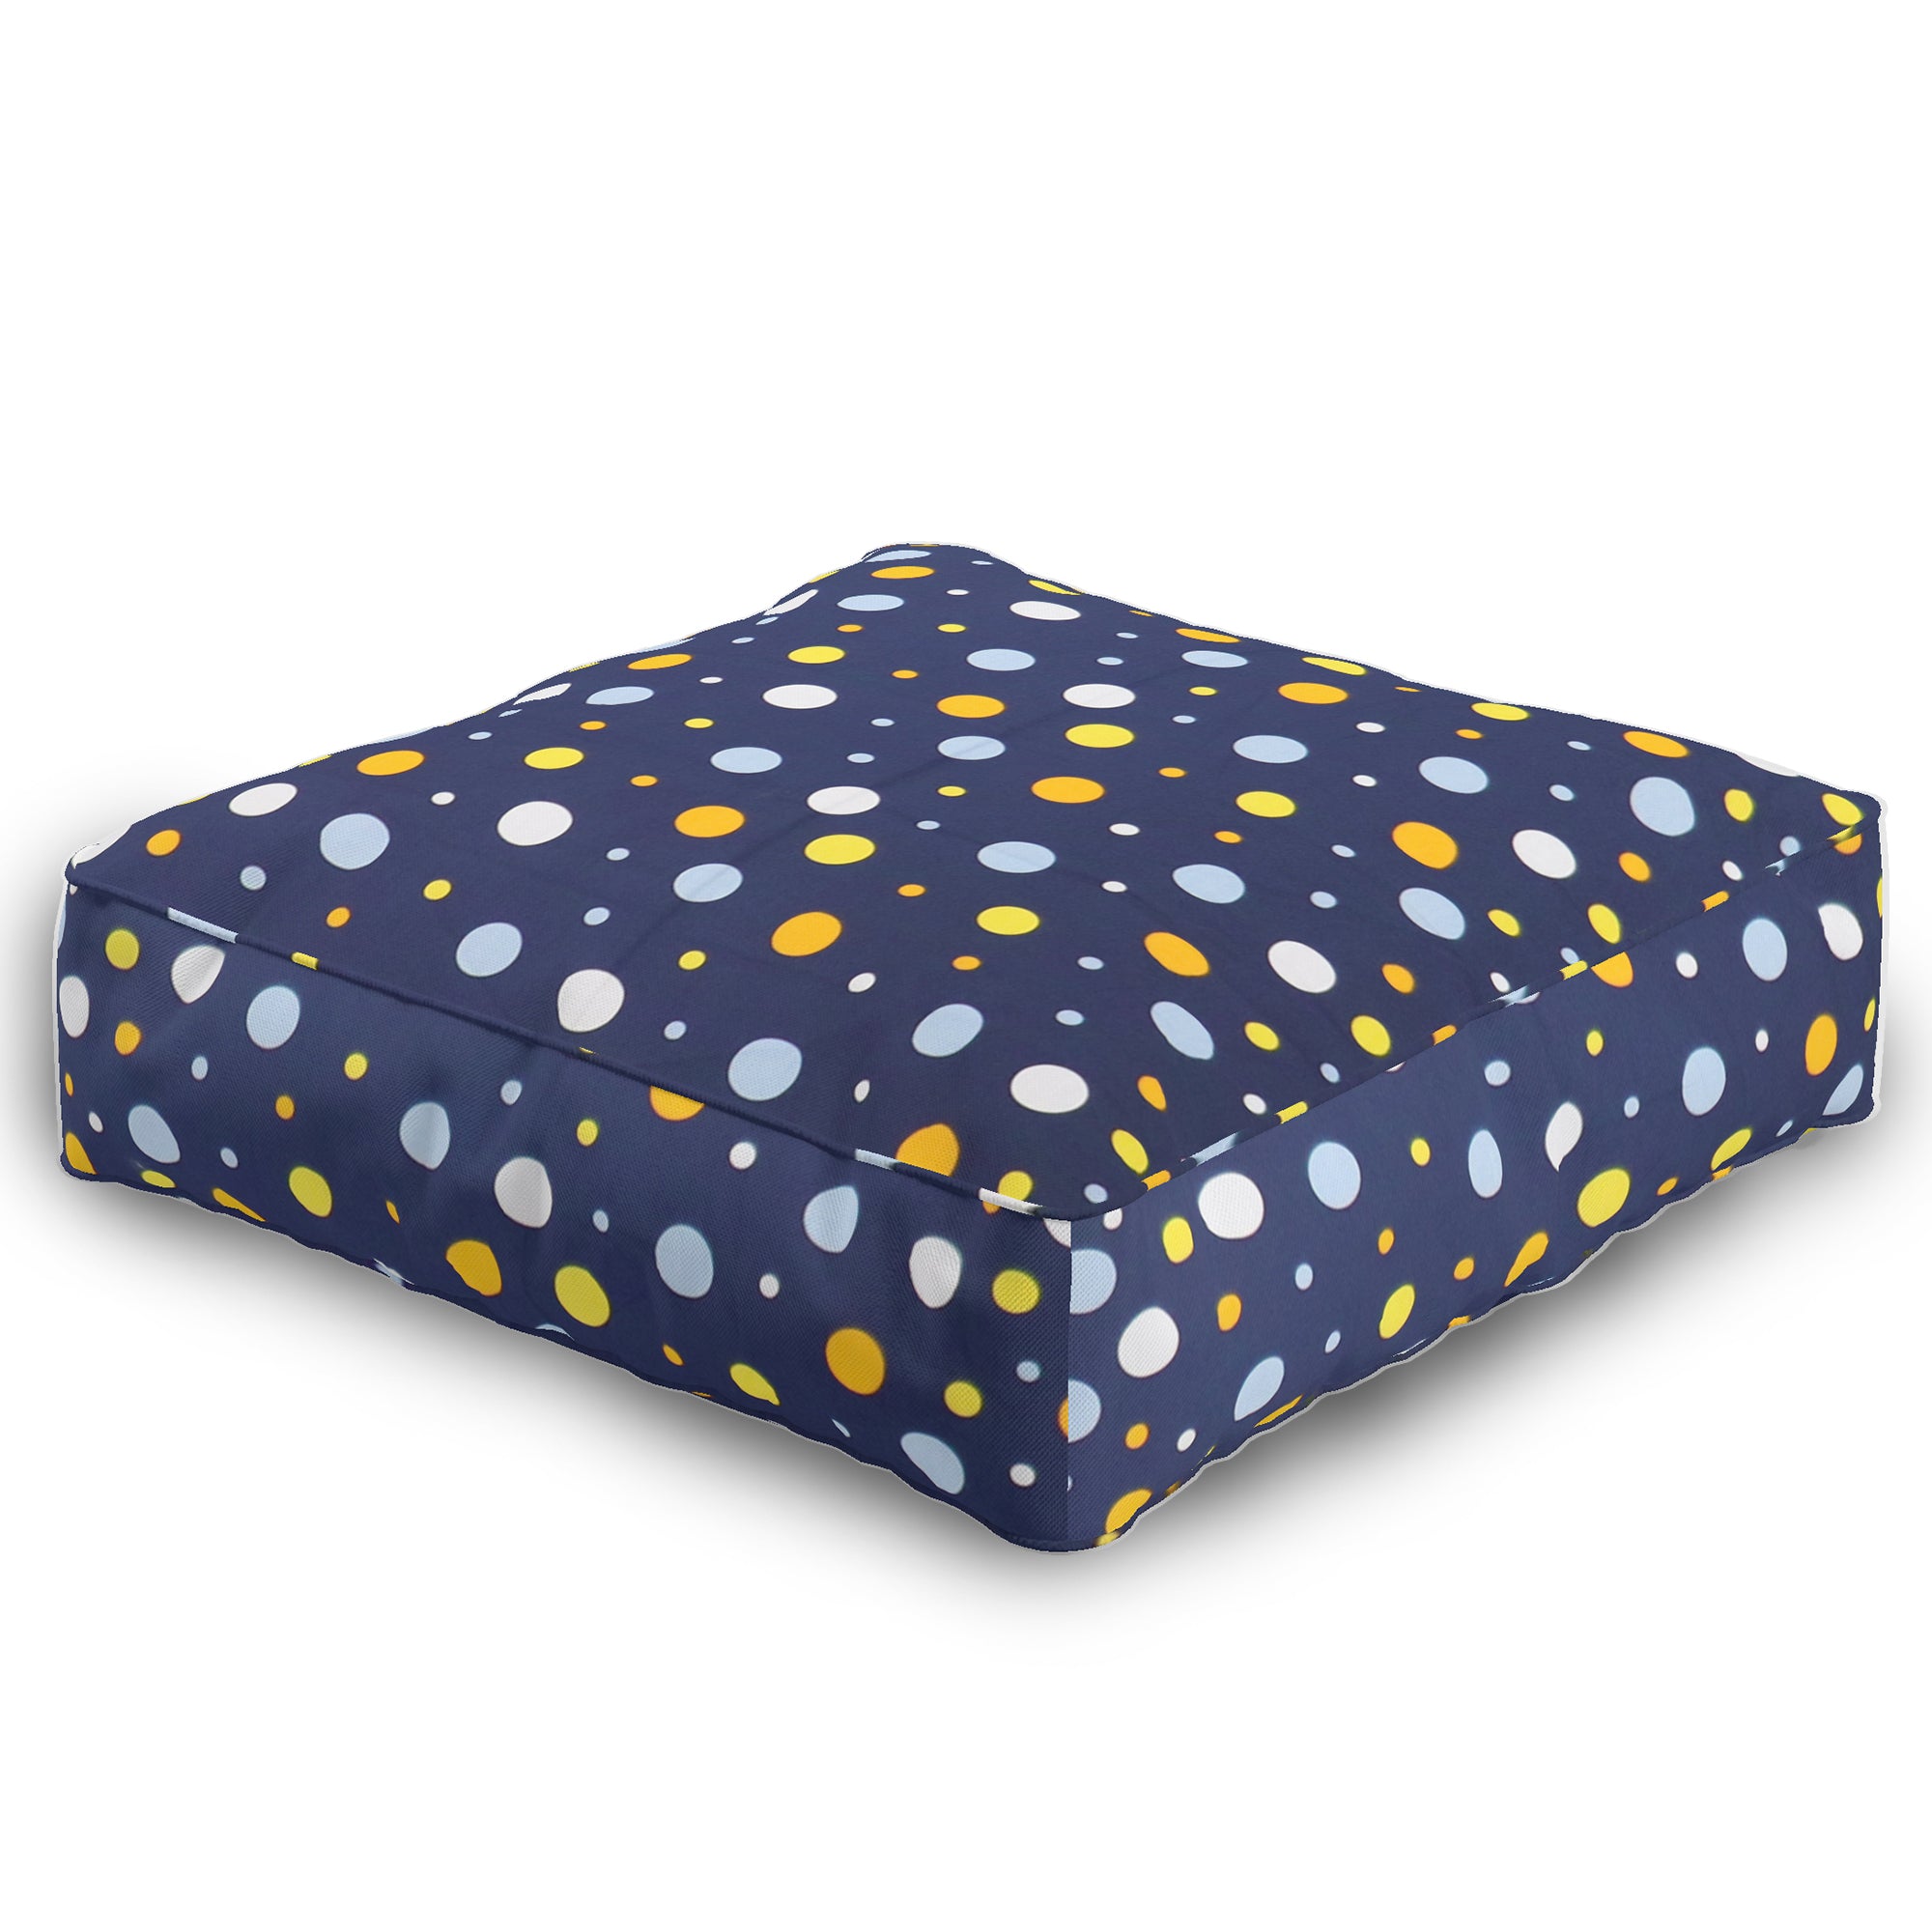 Coozly Zippered Foam Floor Cushions | Seat Cushions | Sofa Cushions with Removable Covers - Polka